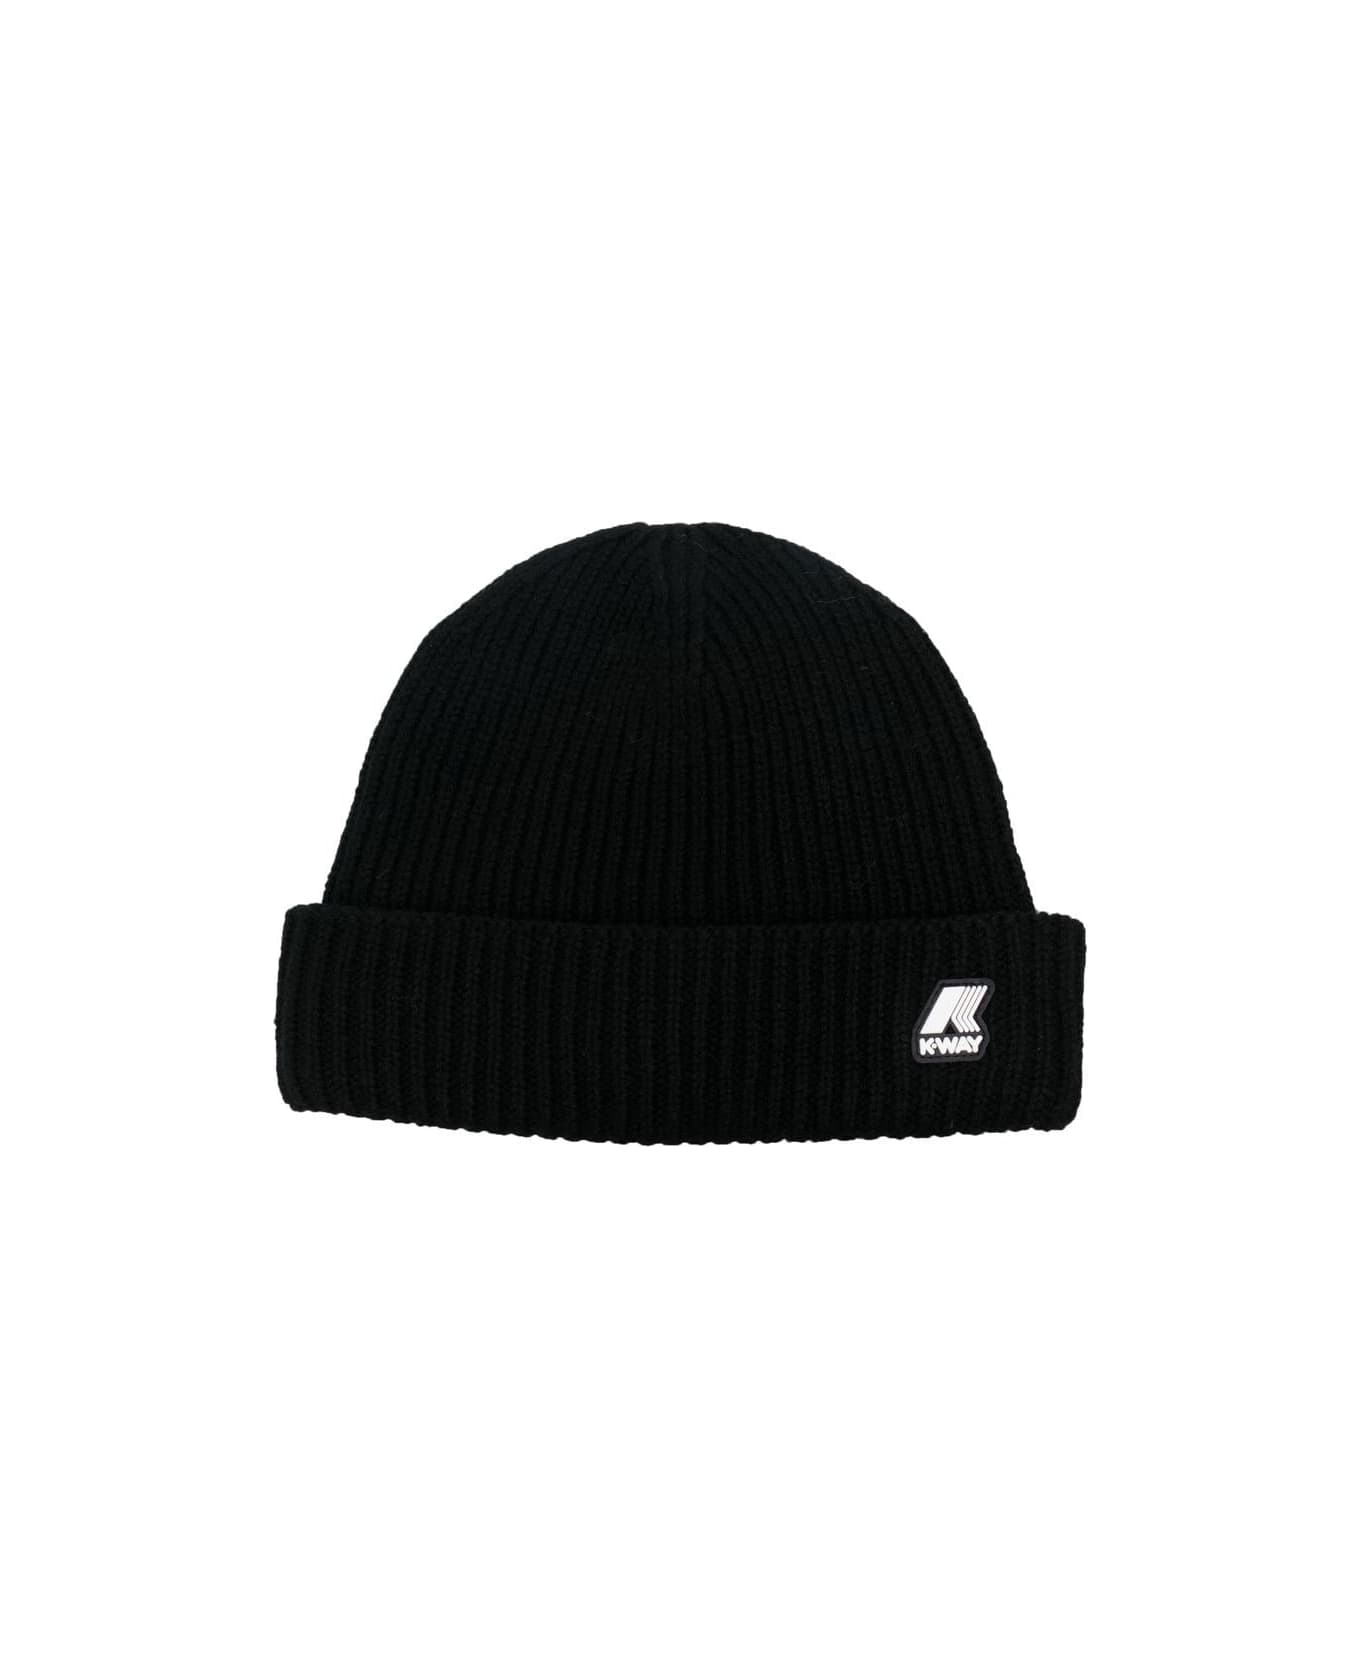 K-Way Ribbed Hat With Patch - Black